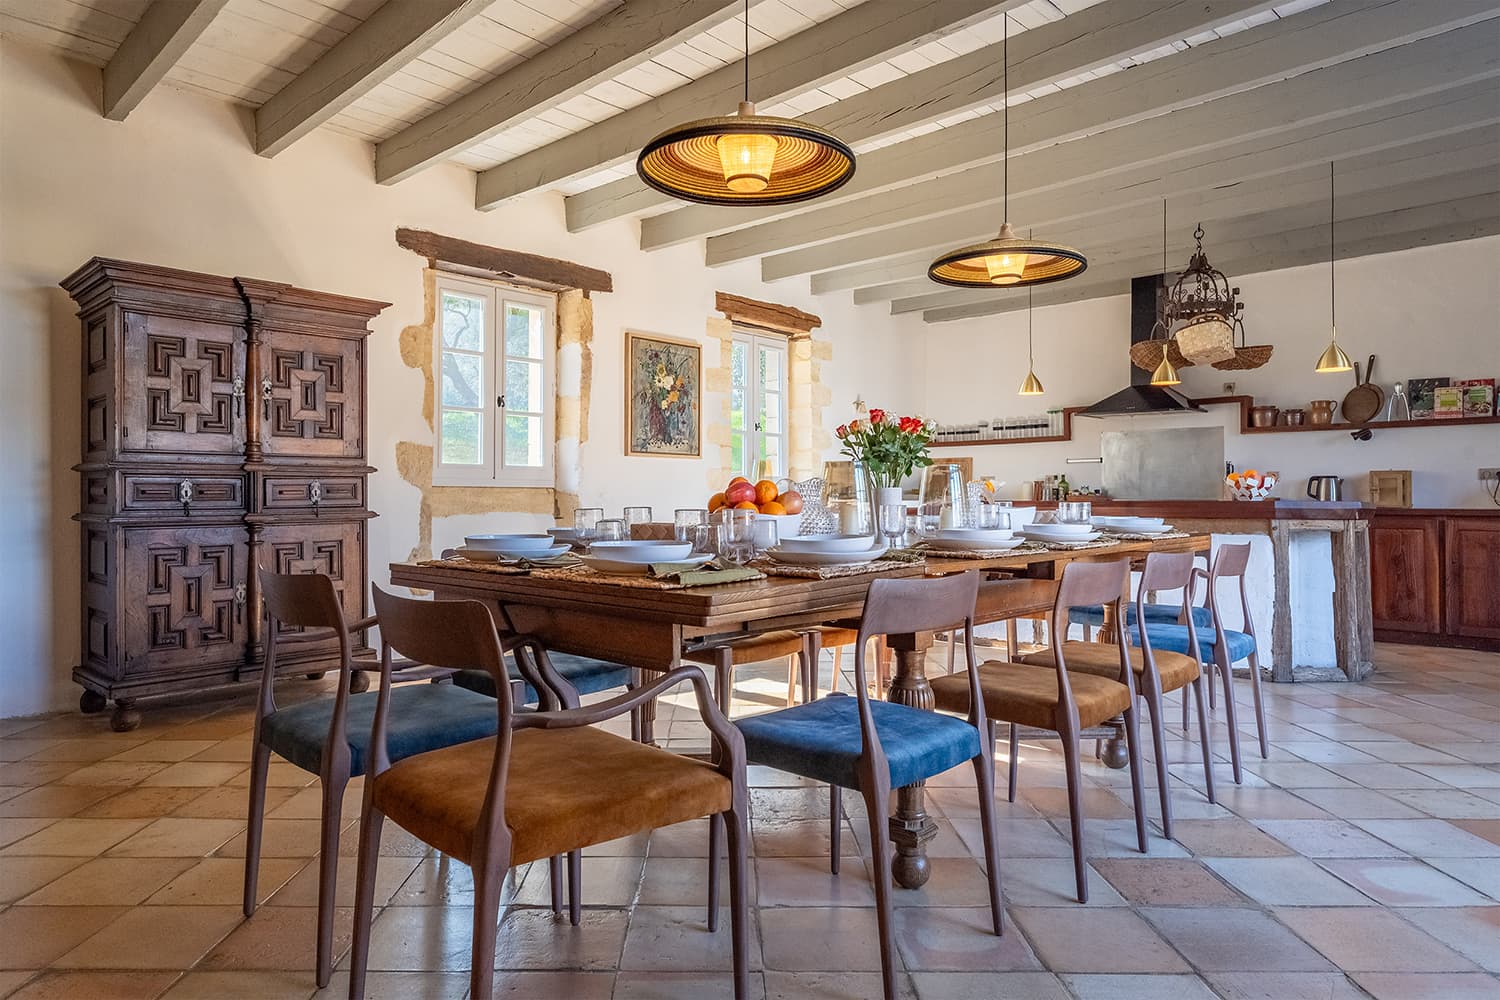 Kitchen | Holiday home in the Dordogne